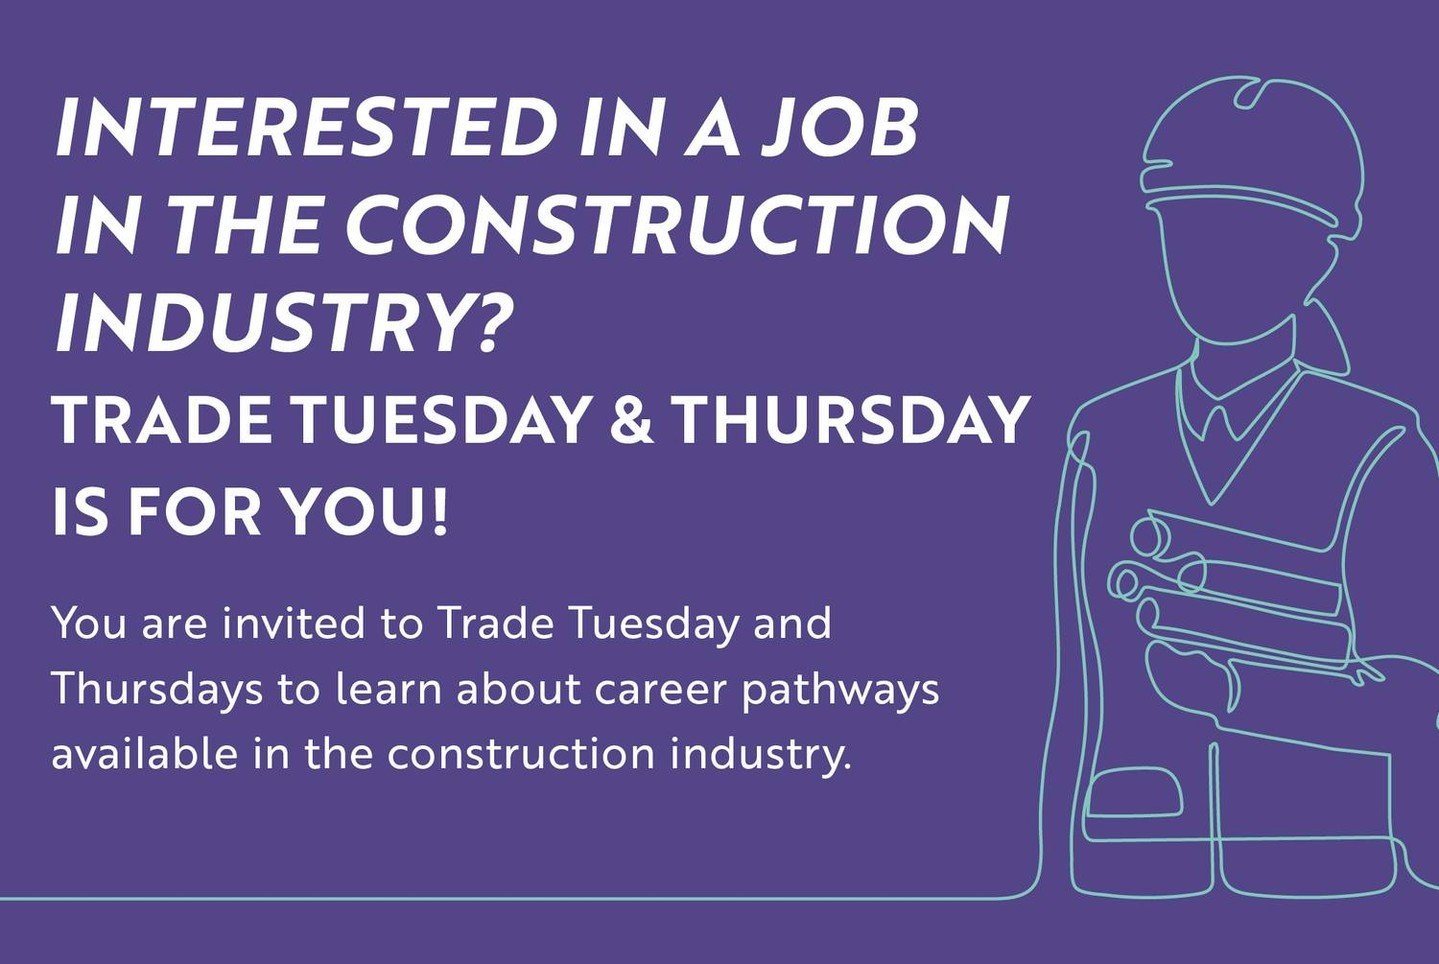 Thinking about a job in construction? Join us on May 7 from 3 - 5 p.m. at the #NEEC for Trade Tuesday and Thursdays to learn about career pathways available in the construction industry.

Event details at link in bio.